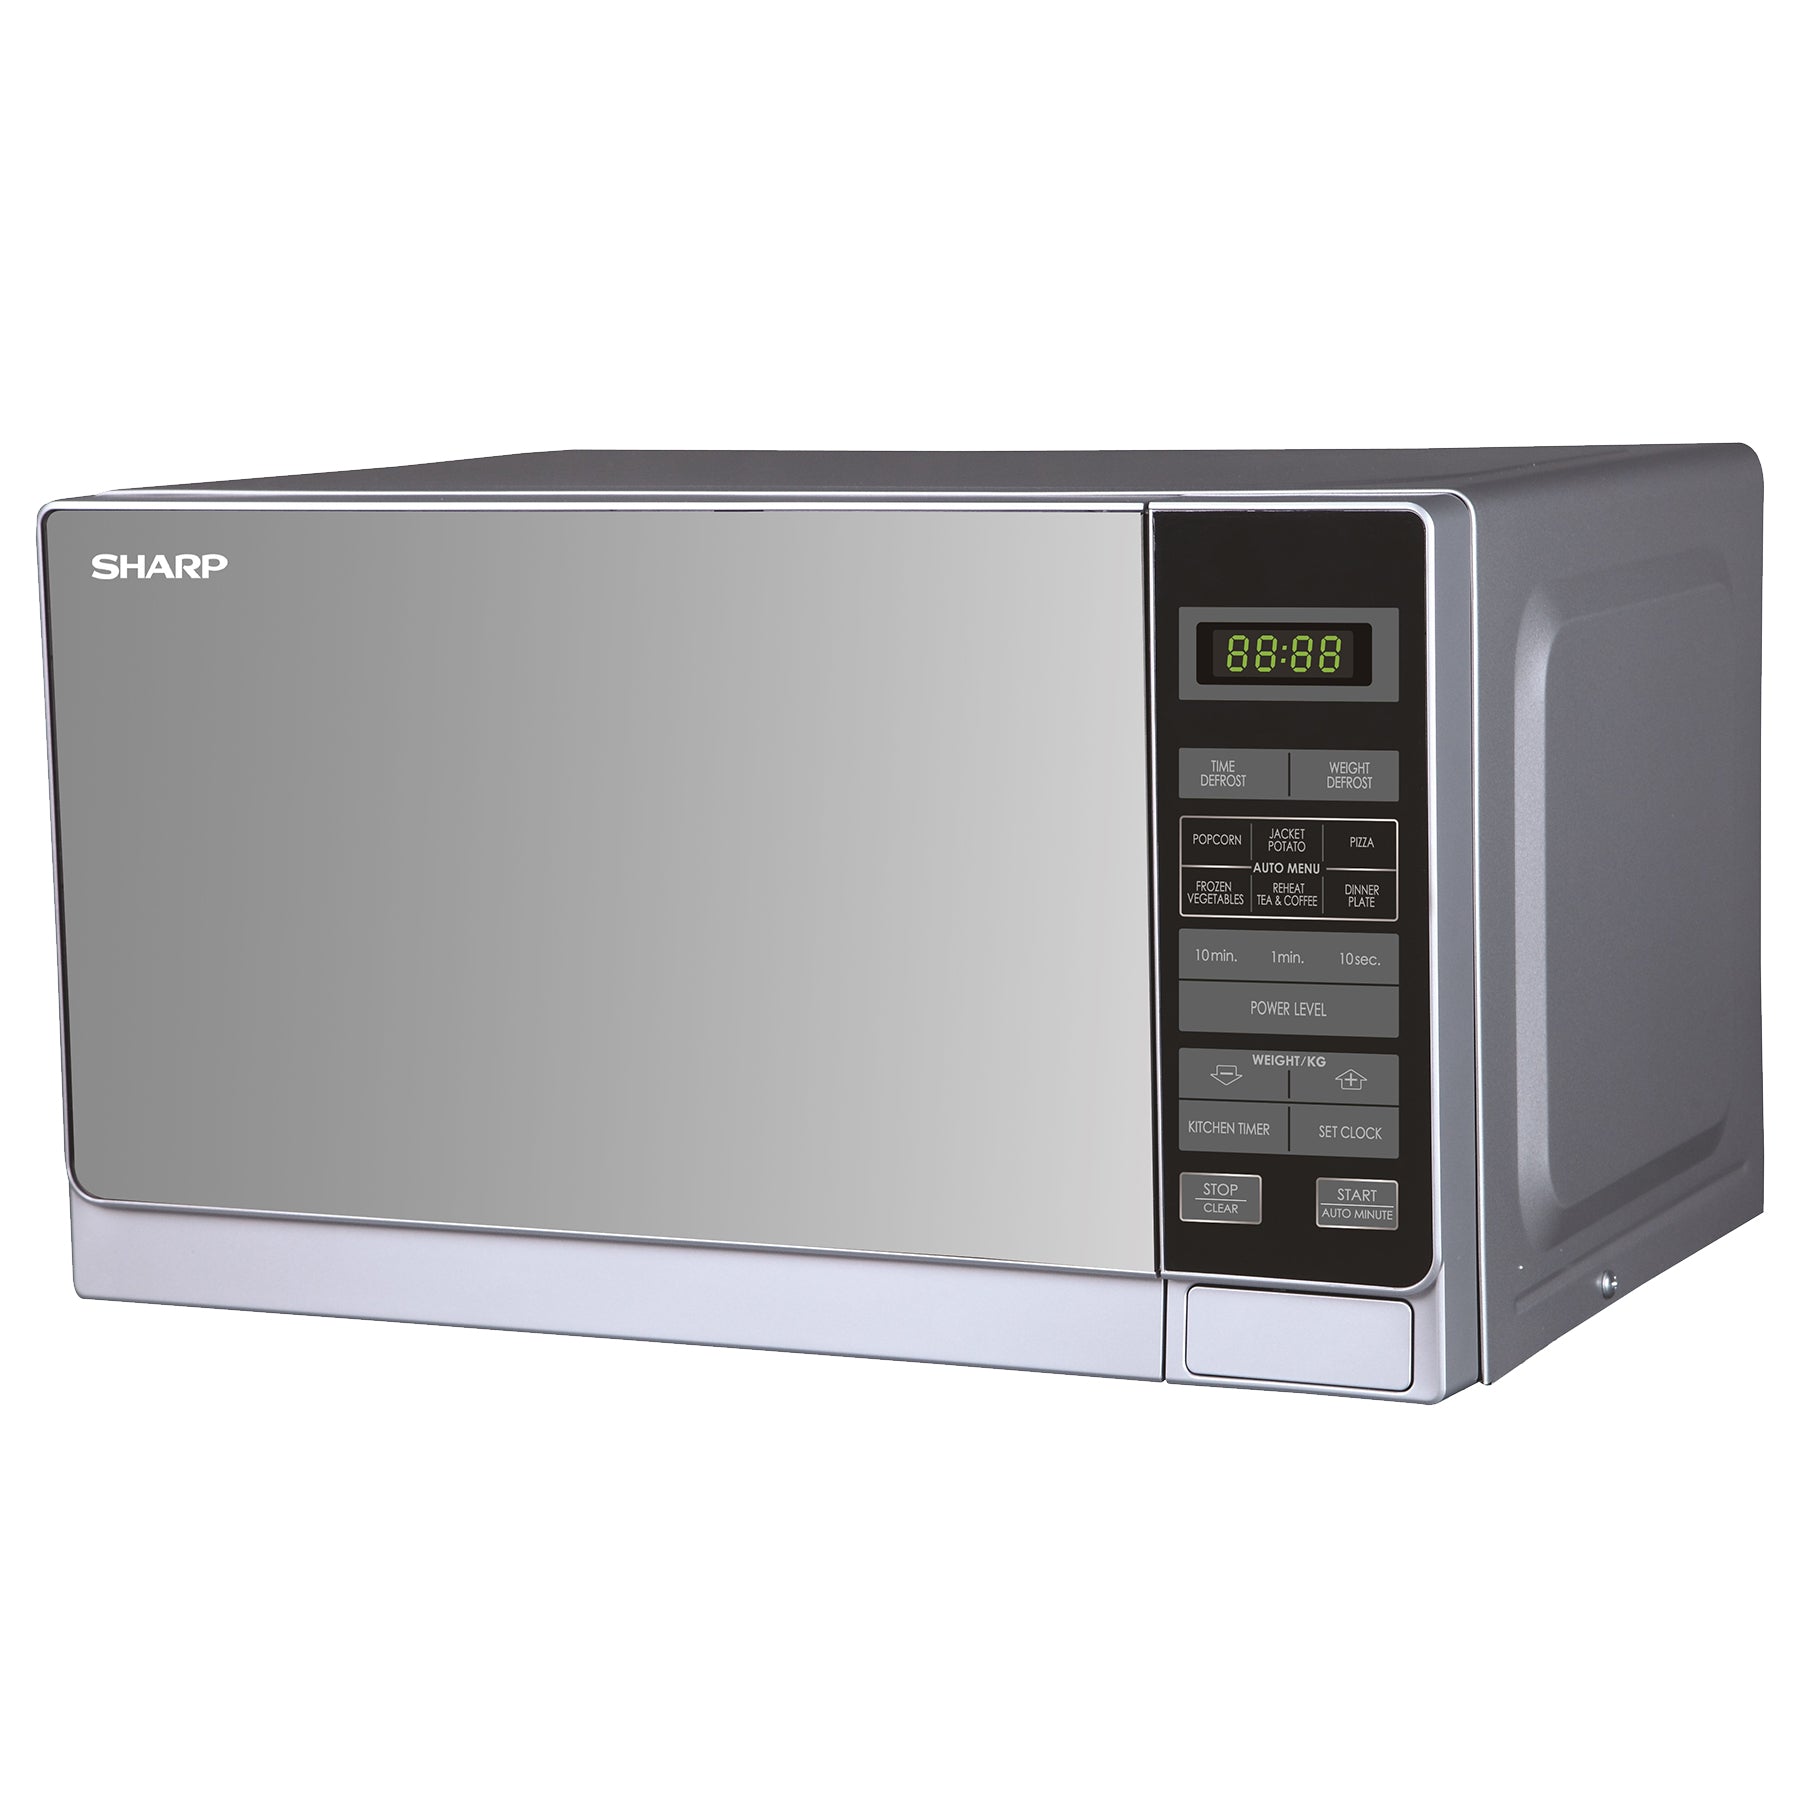 Sharp 20L Microwave Oven R-22A0-review-singapore